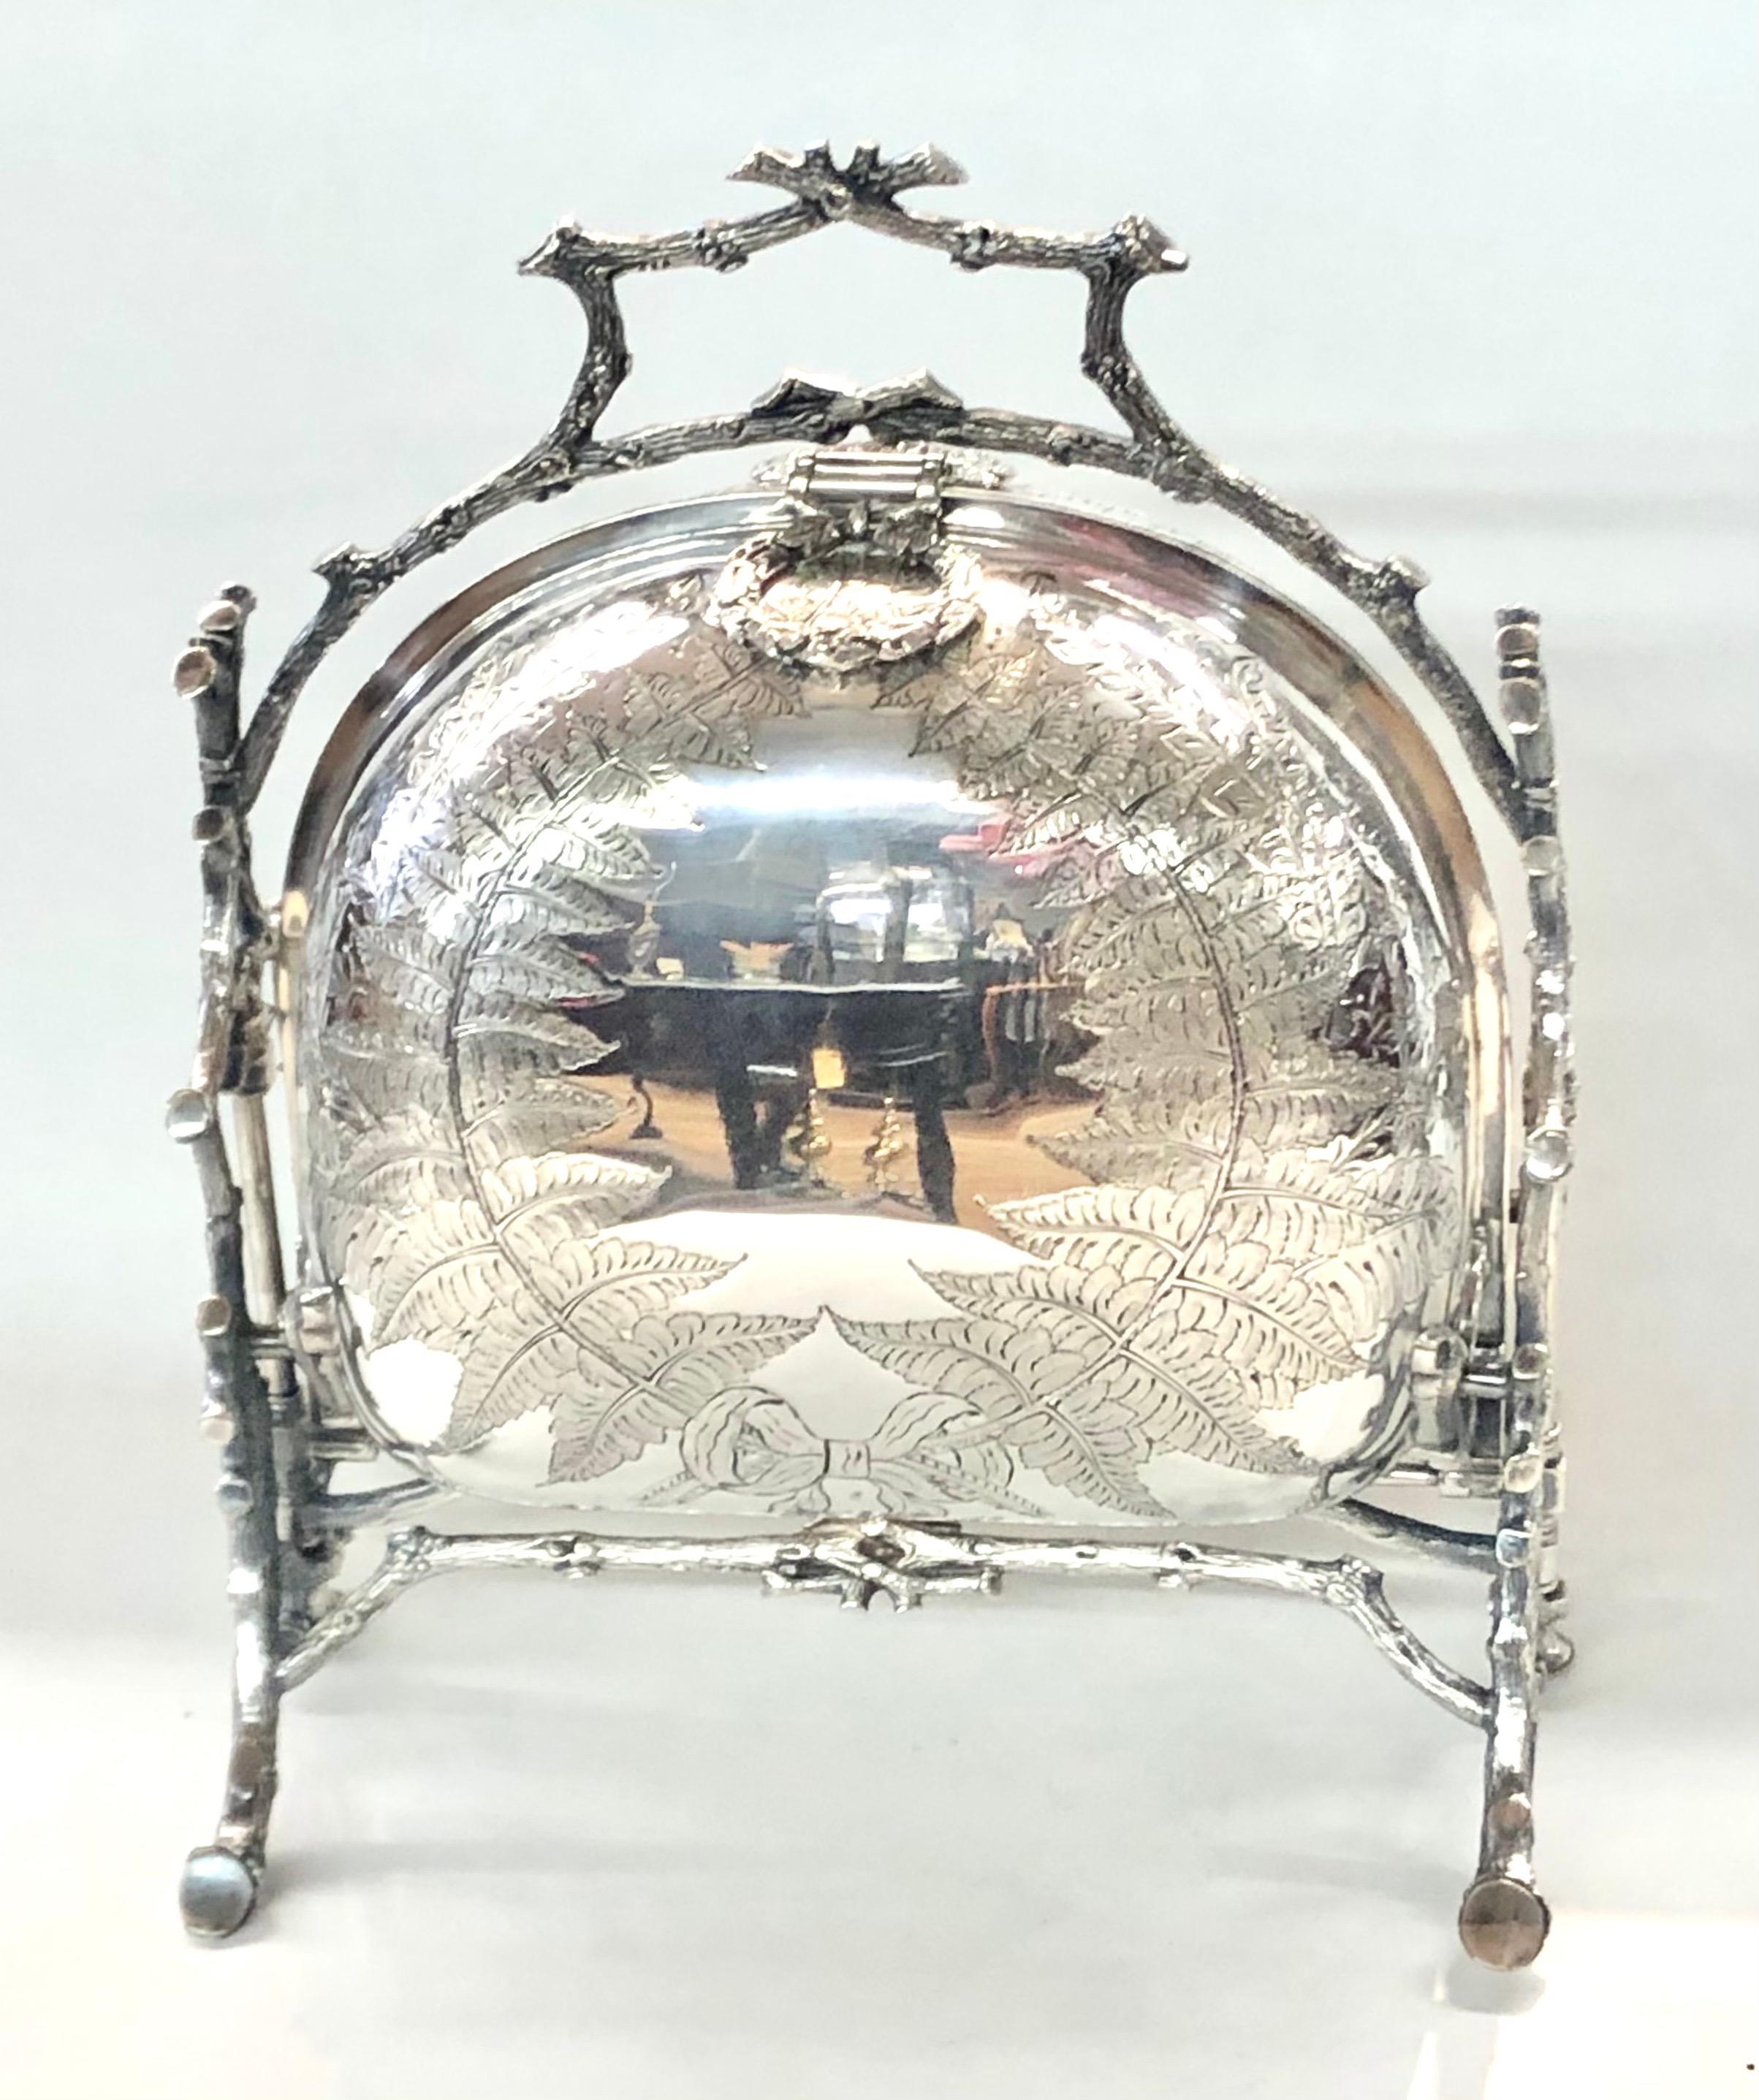 Extraordinary antique English Sheffield silver plate exceptionally hand chased and engraved Double Folding Biscuit Box with fern motif chasing and engraving and handsome pierced and lidded interior. (English biscuits are what we call crackers like